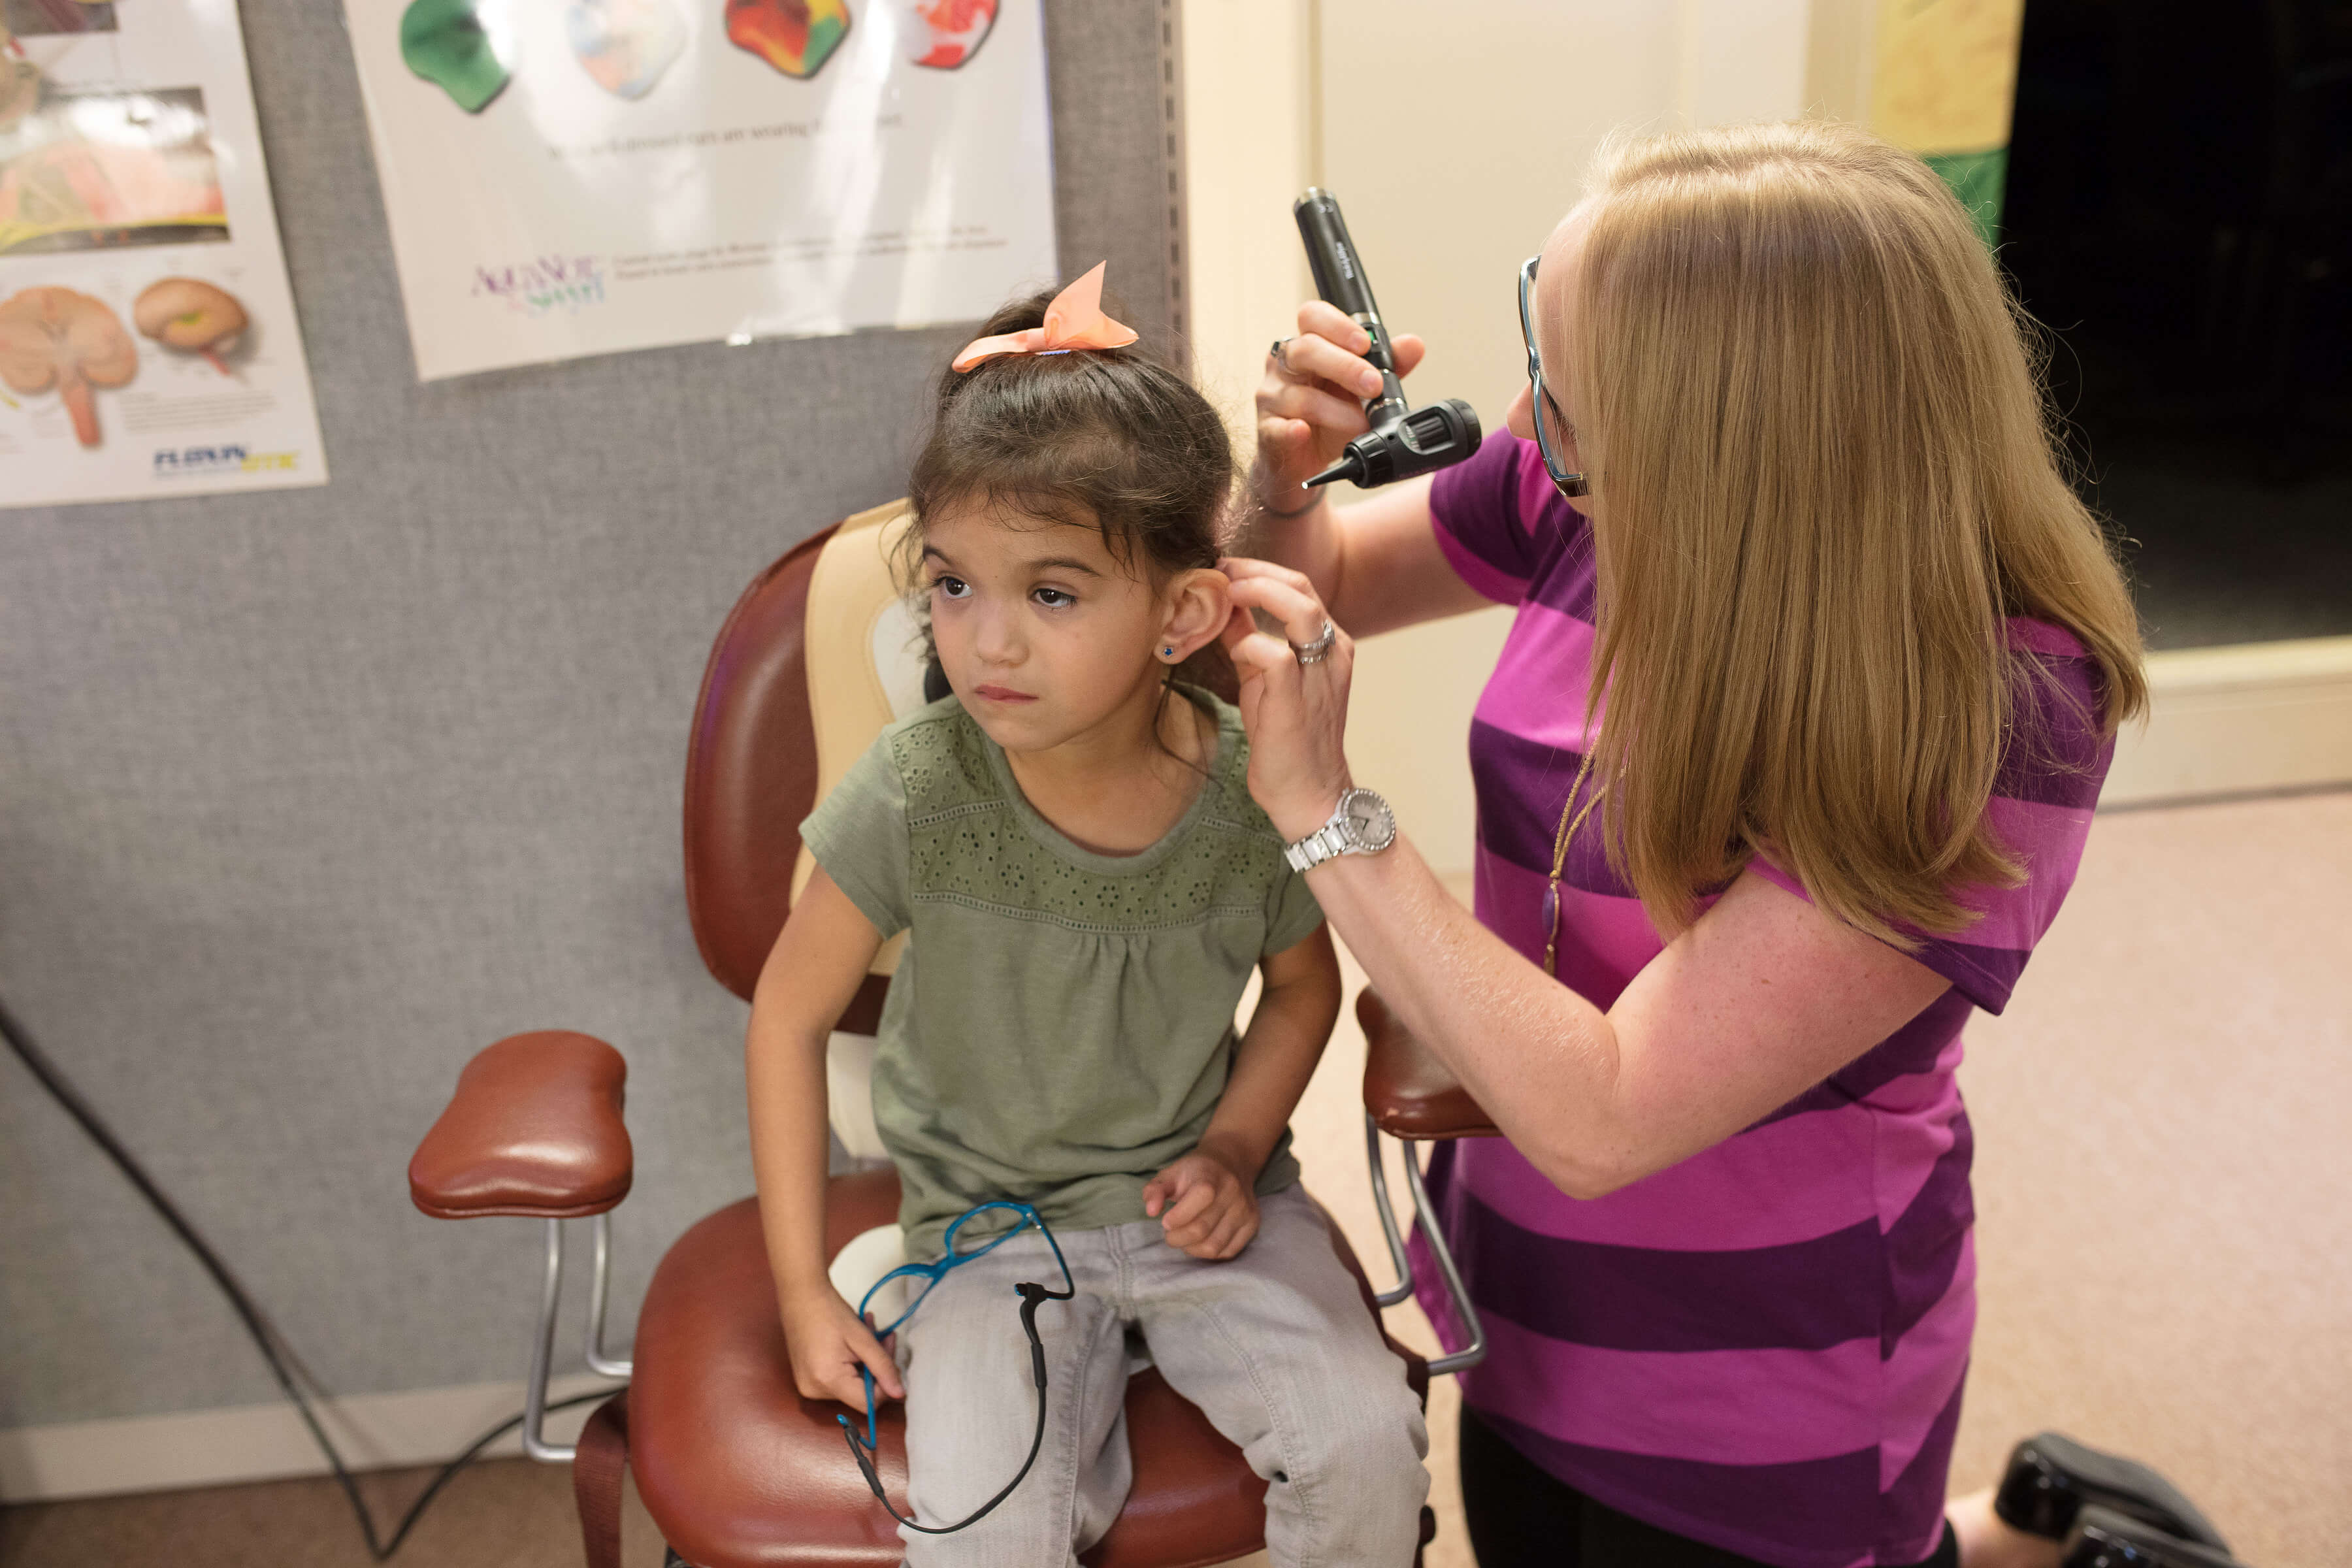 An audiology patient receives an assessment at The Center for Hearing and Speech on West Dallas. (Photo courtesy of The Center for Hearing and Speech)